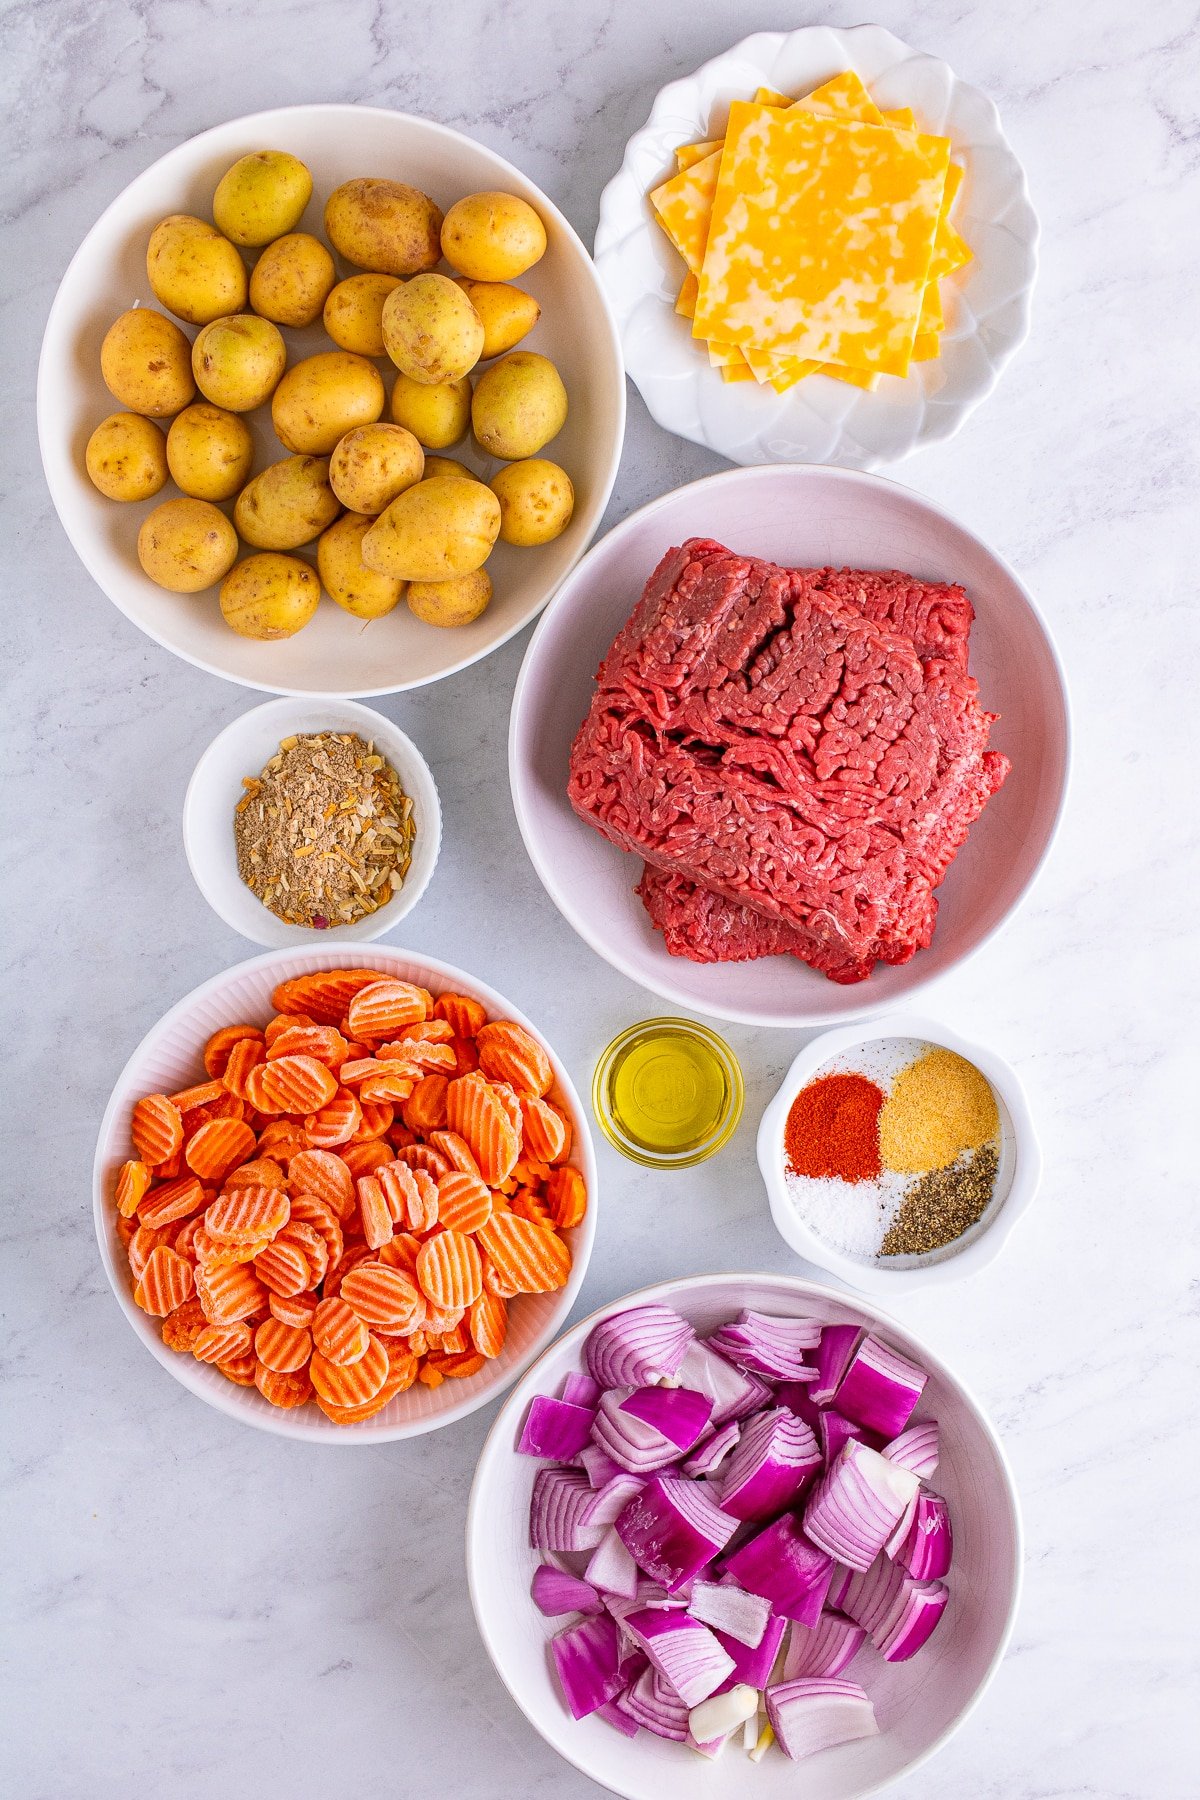 Overhead image showing the ingredients needed to make hamburger dinner foil packets on grey marble table top